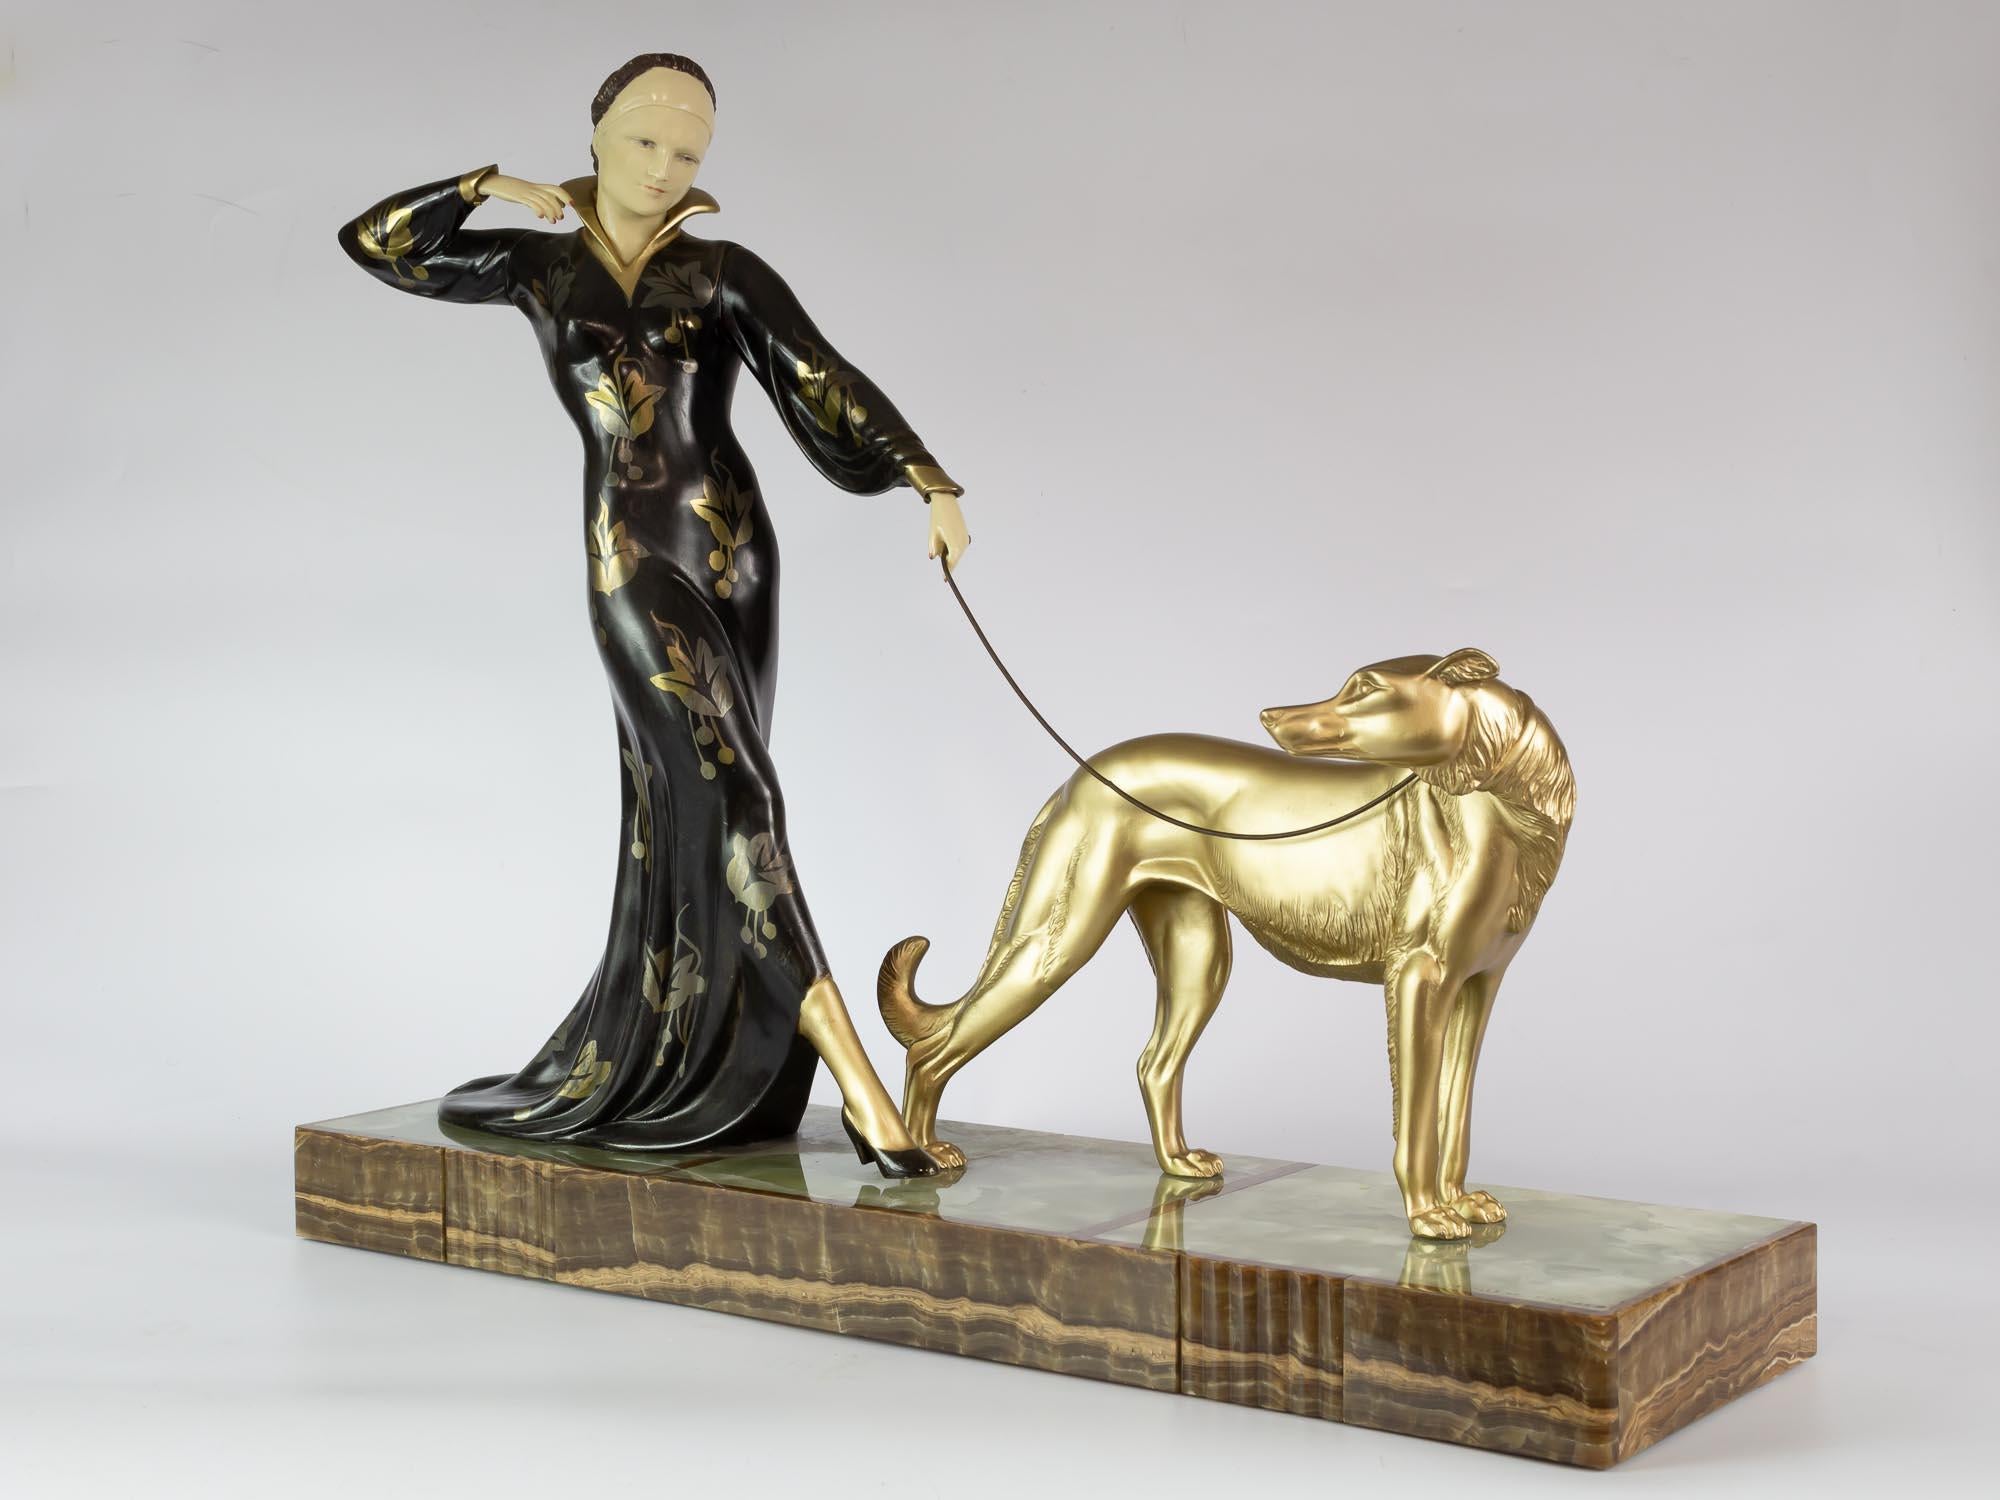 Art deco sculptural group in ivorine and metal patinated metal and gilded  with an onyx plate.
Signed by Menneville et Rochard (Ugo Cipriani and Irenée Rochard). The lady  was modeled by Cipriani and barzoi by Irénée Rochard.
Made in France Ca,